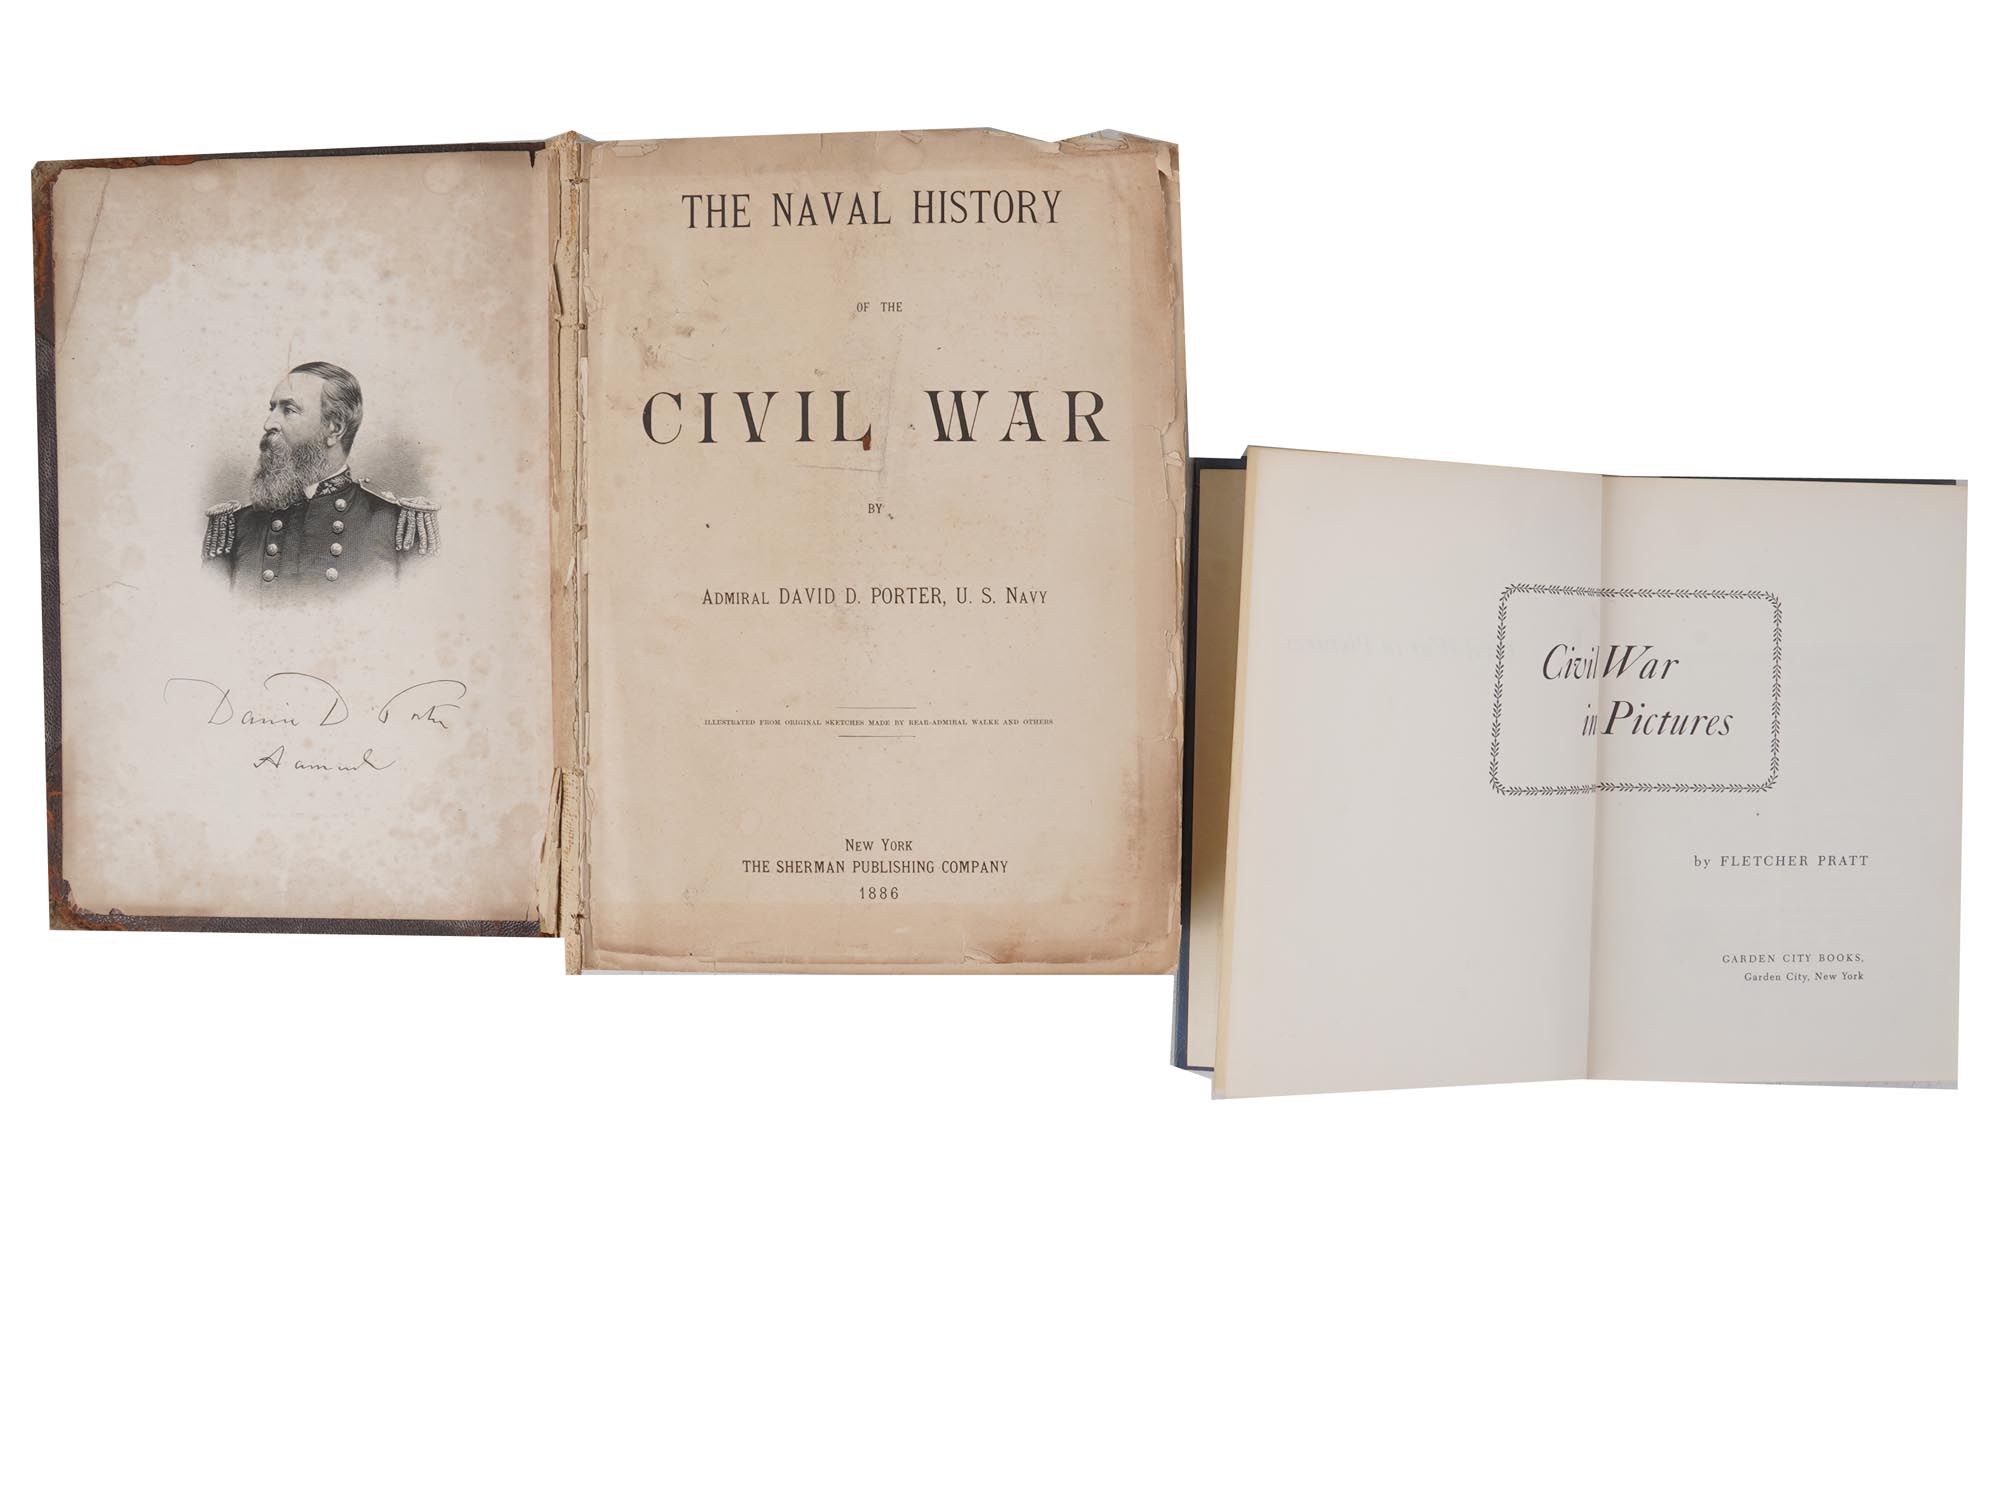 ANTIQUE AND VINTAGE AMERICAN CIVIL WAR BOOKS PIC-2